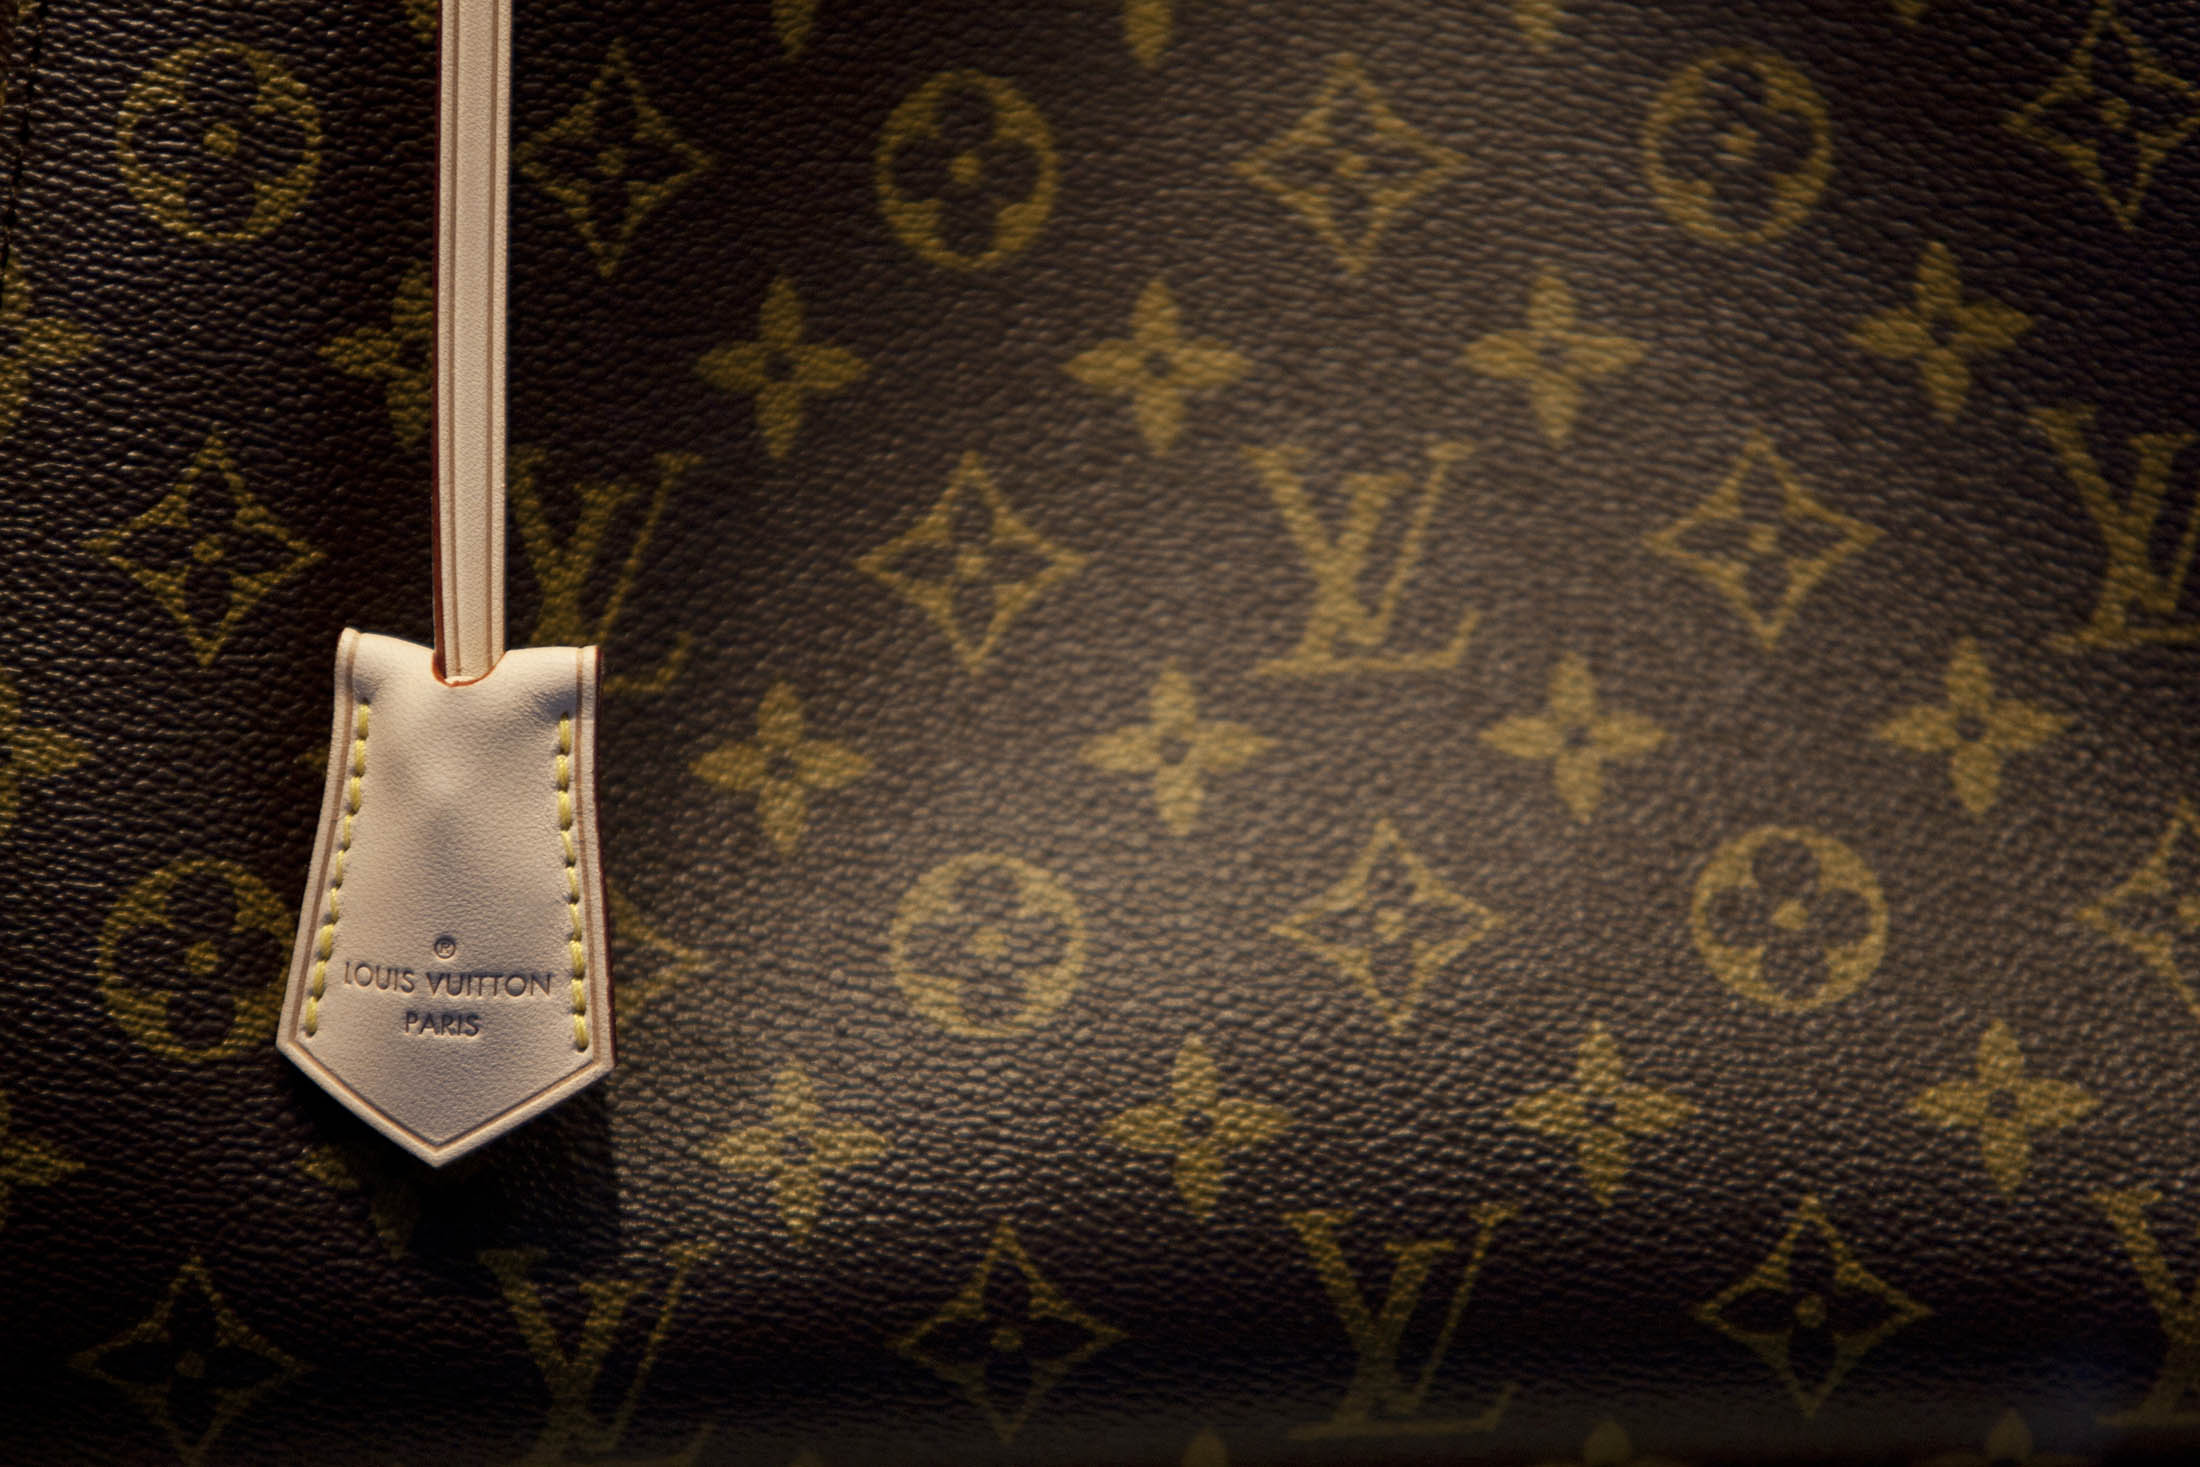 Louis Vuitton in Talks to Open Factory in U.S., CEO Burke Says